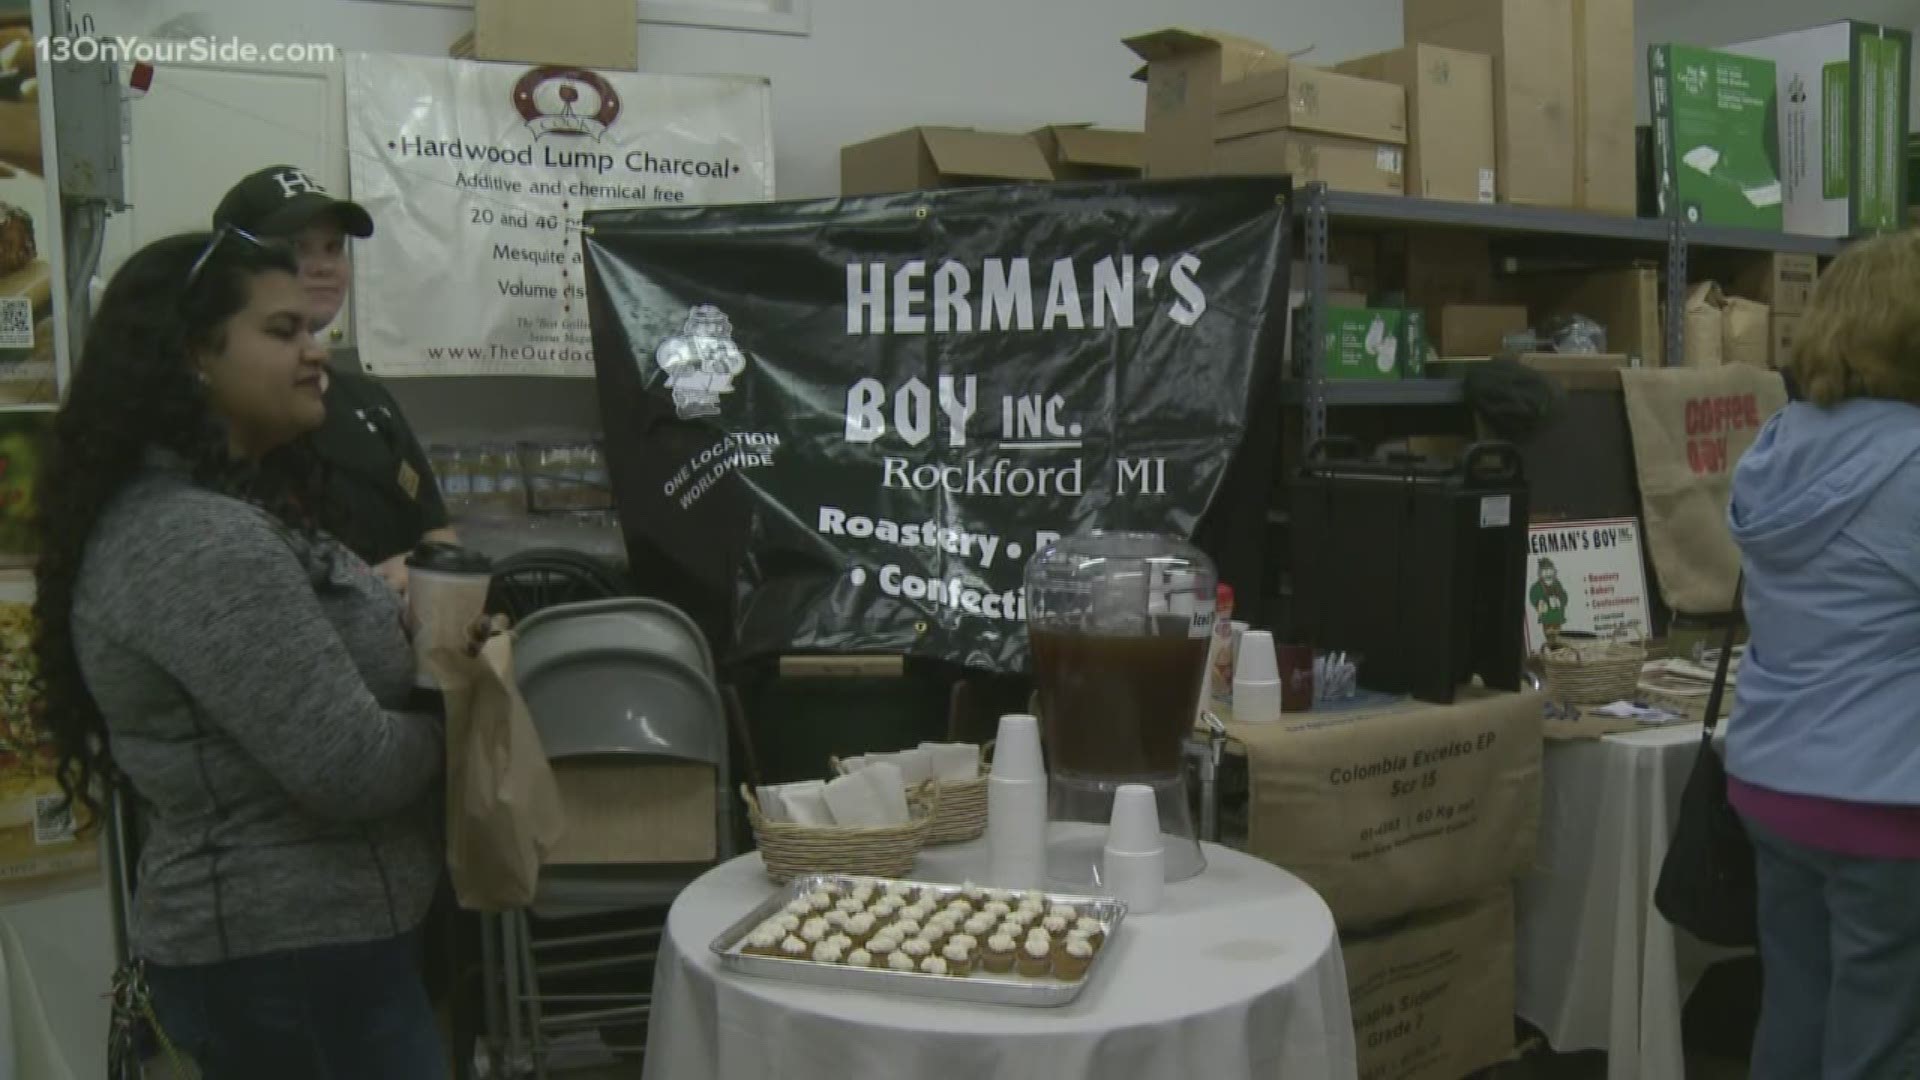 When Herman's Boy opened in 1979, founder Floyd Havemeier says he introduced customers to bagels, a baked item not very popular in West Michigan at the time.